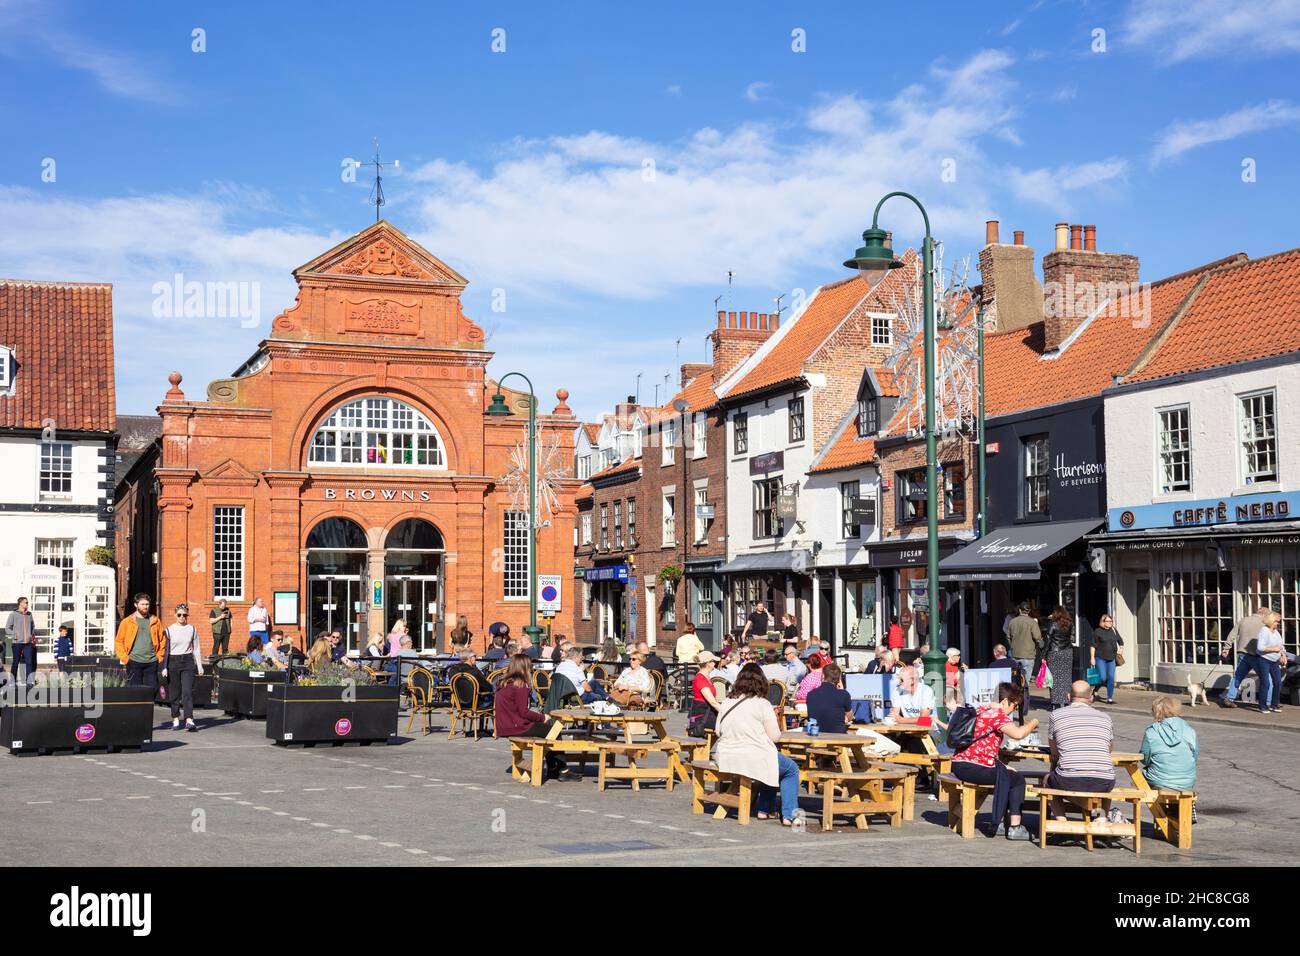 Browns Beverley a department store and Caffe Nero outdoor cafe in the Market town of Beverley Yorkshire East Riding of Yorkshire England UK GB Europe Stock Photo